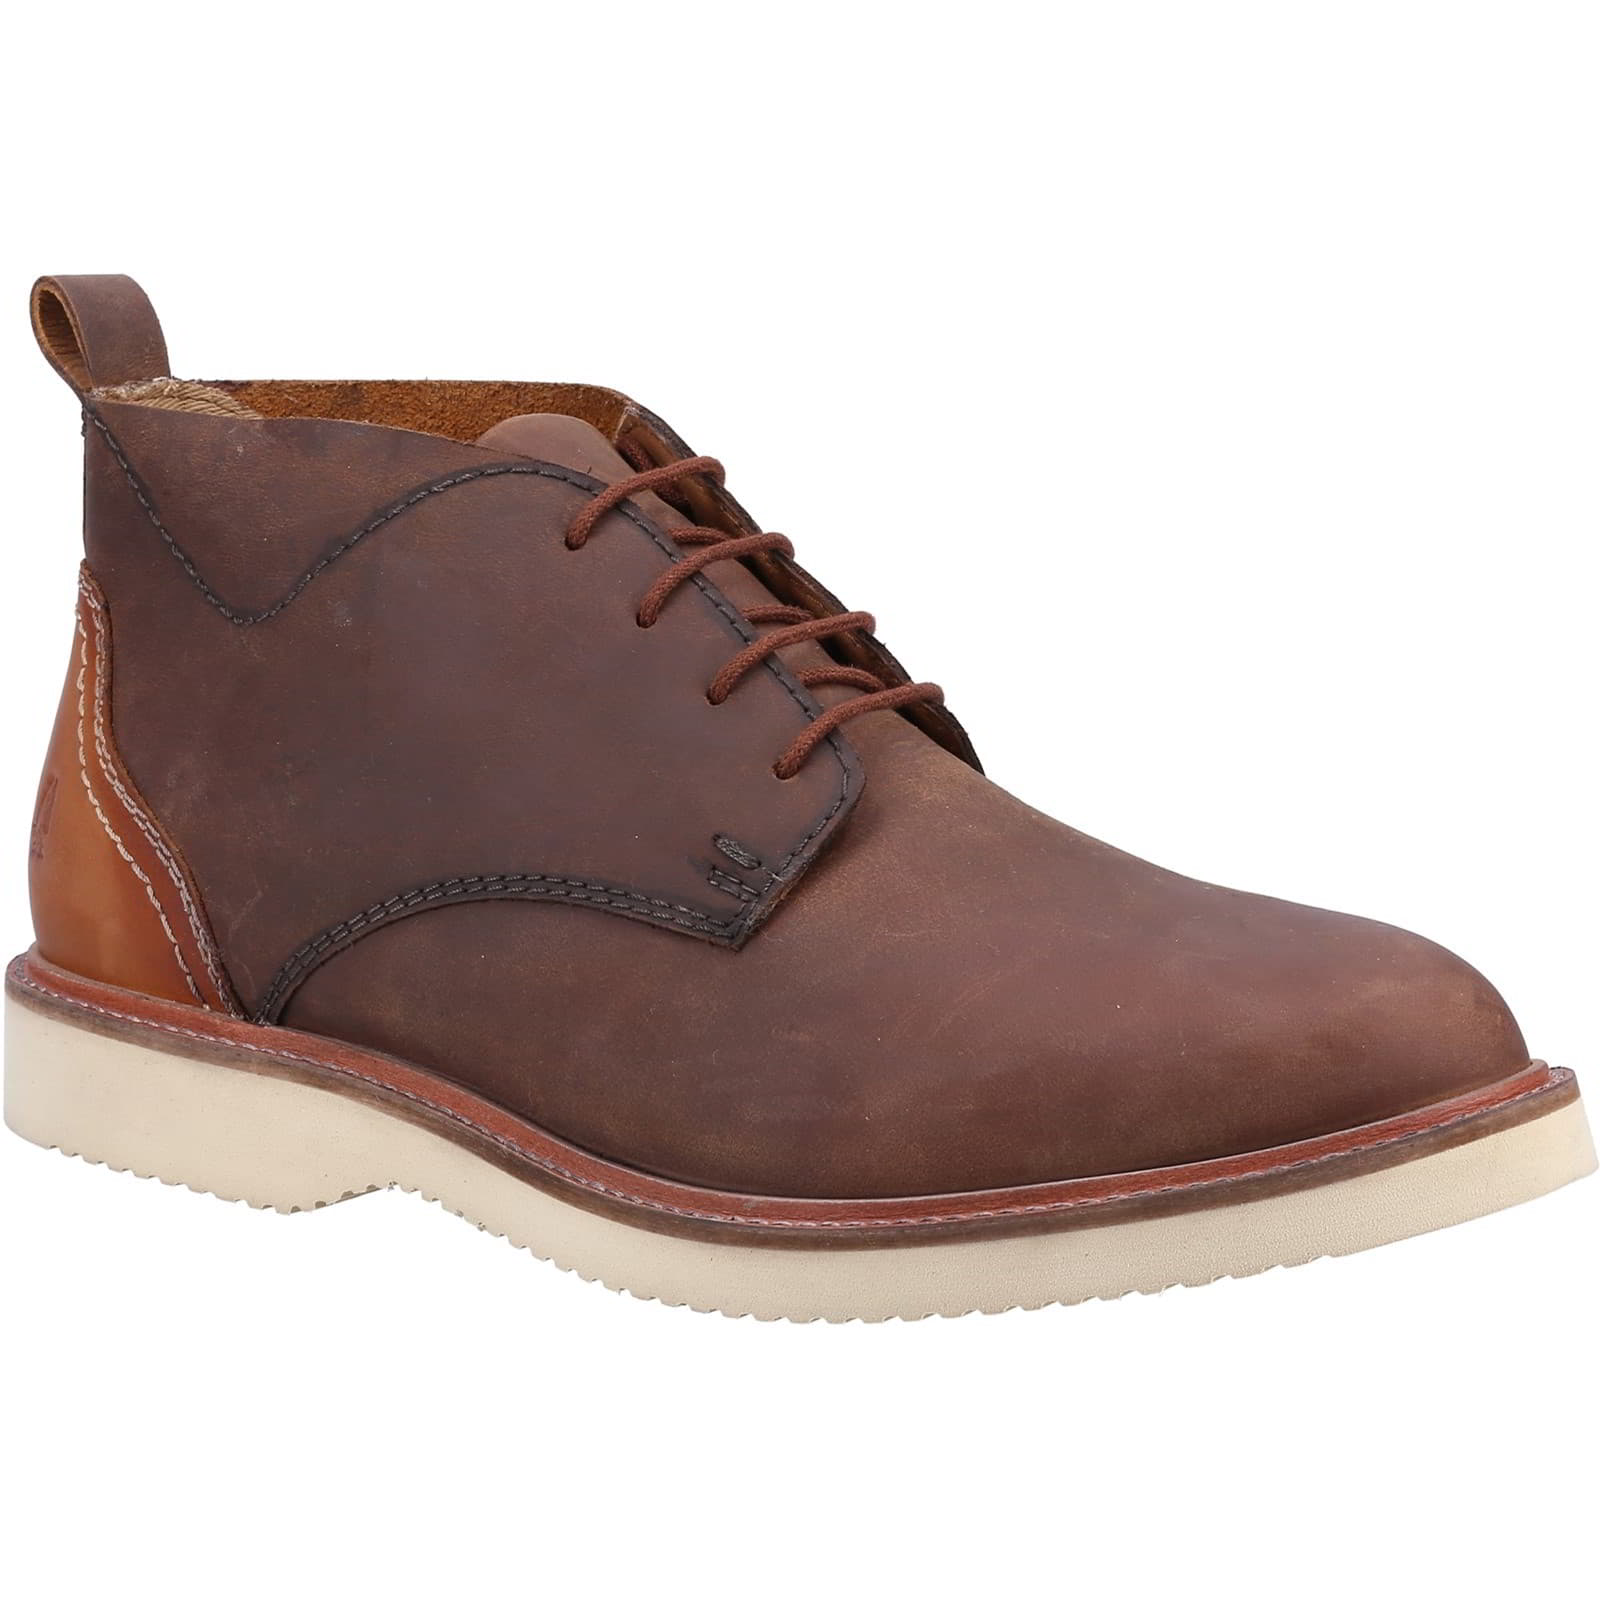 Hush Puppies Men's Wesley Lace UP Desert Chukka Ankle Boots - UK 8